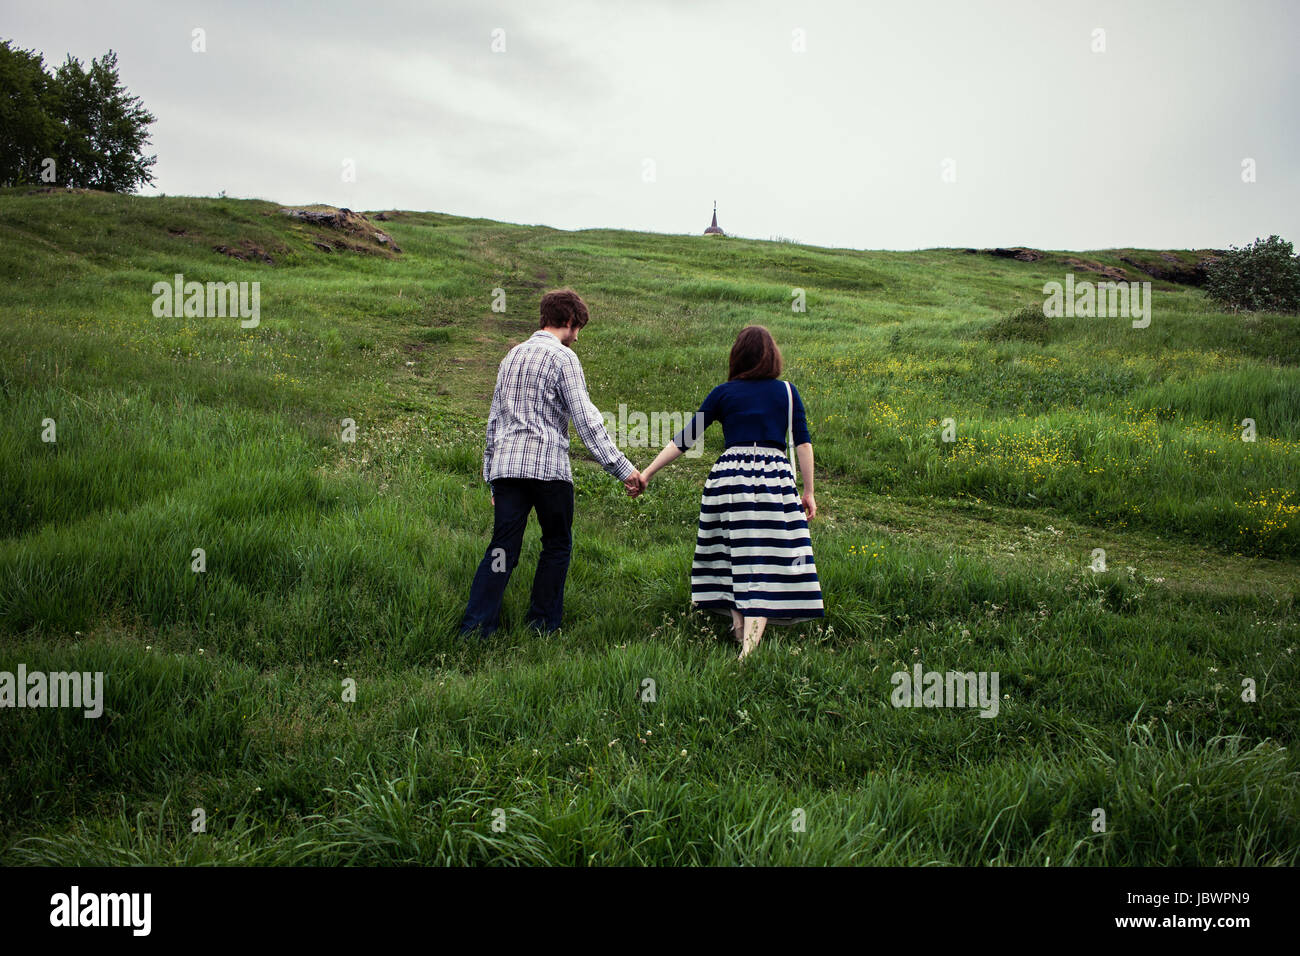 Couple walking up grassy hill, holding hands, rear view Stock Photo